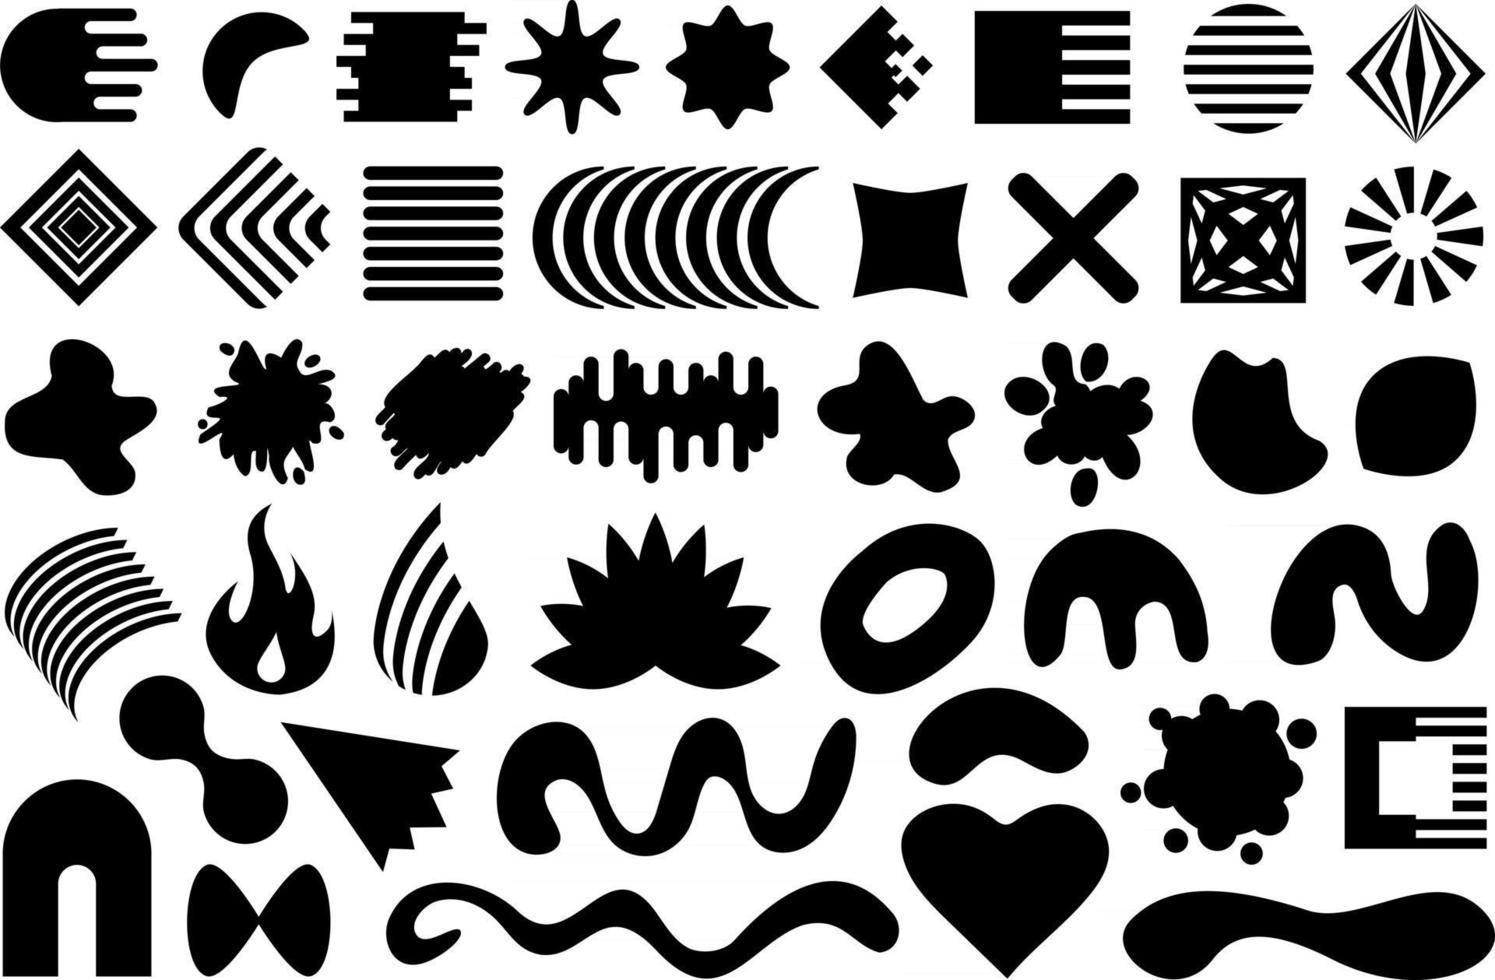 Vector geometric shapes set. Collection of black flat design elements isolated on white background.